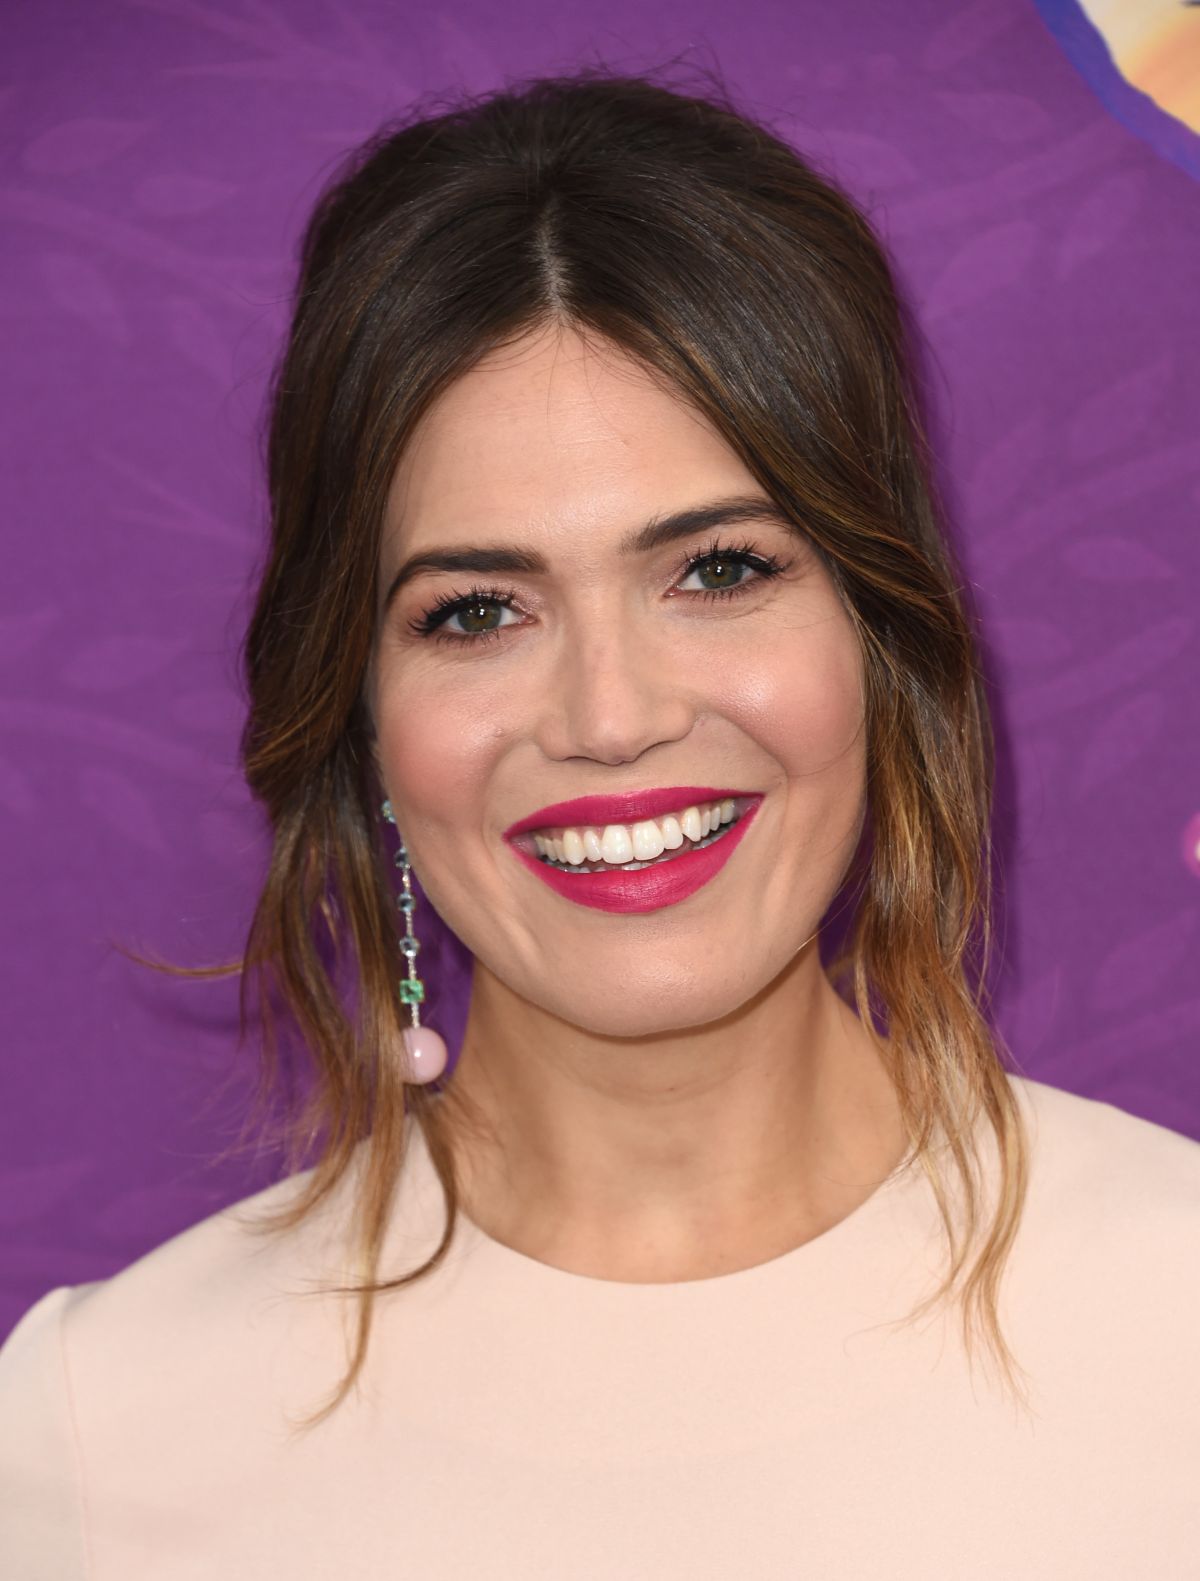 10 Facts You May Not Know About Mandy Moore Mandy Moo - vrogue.co